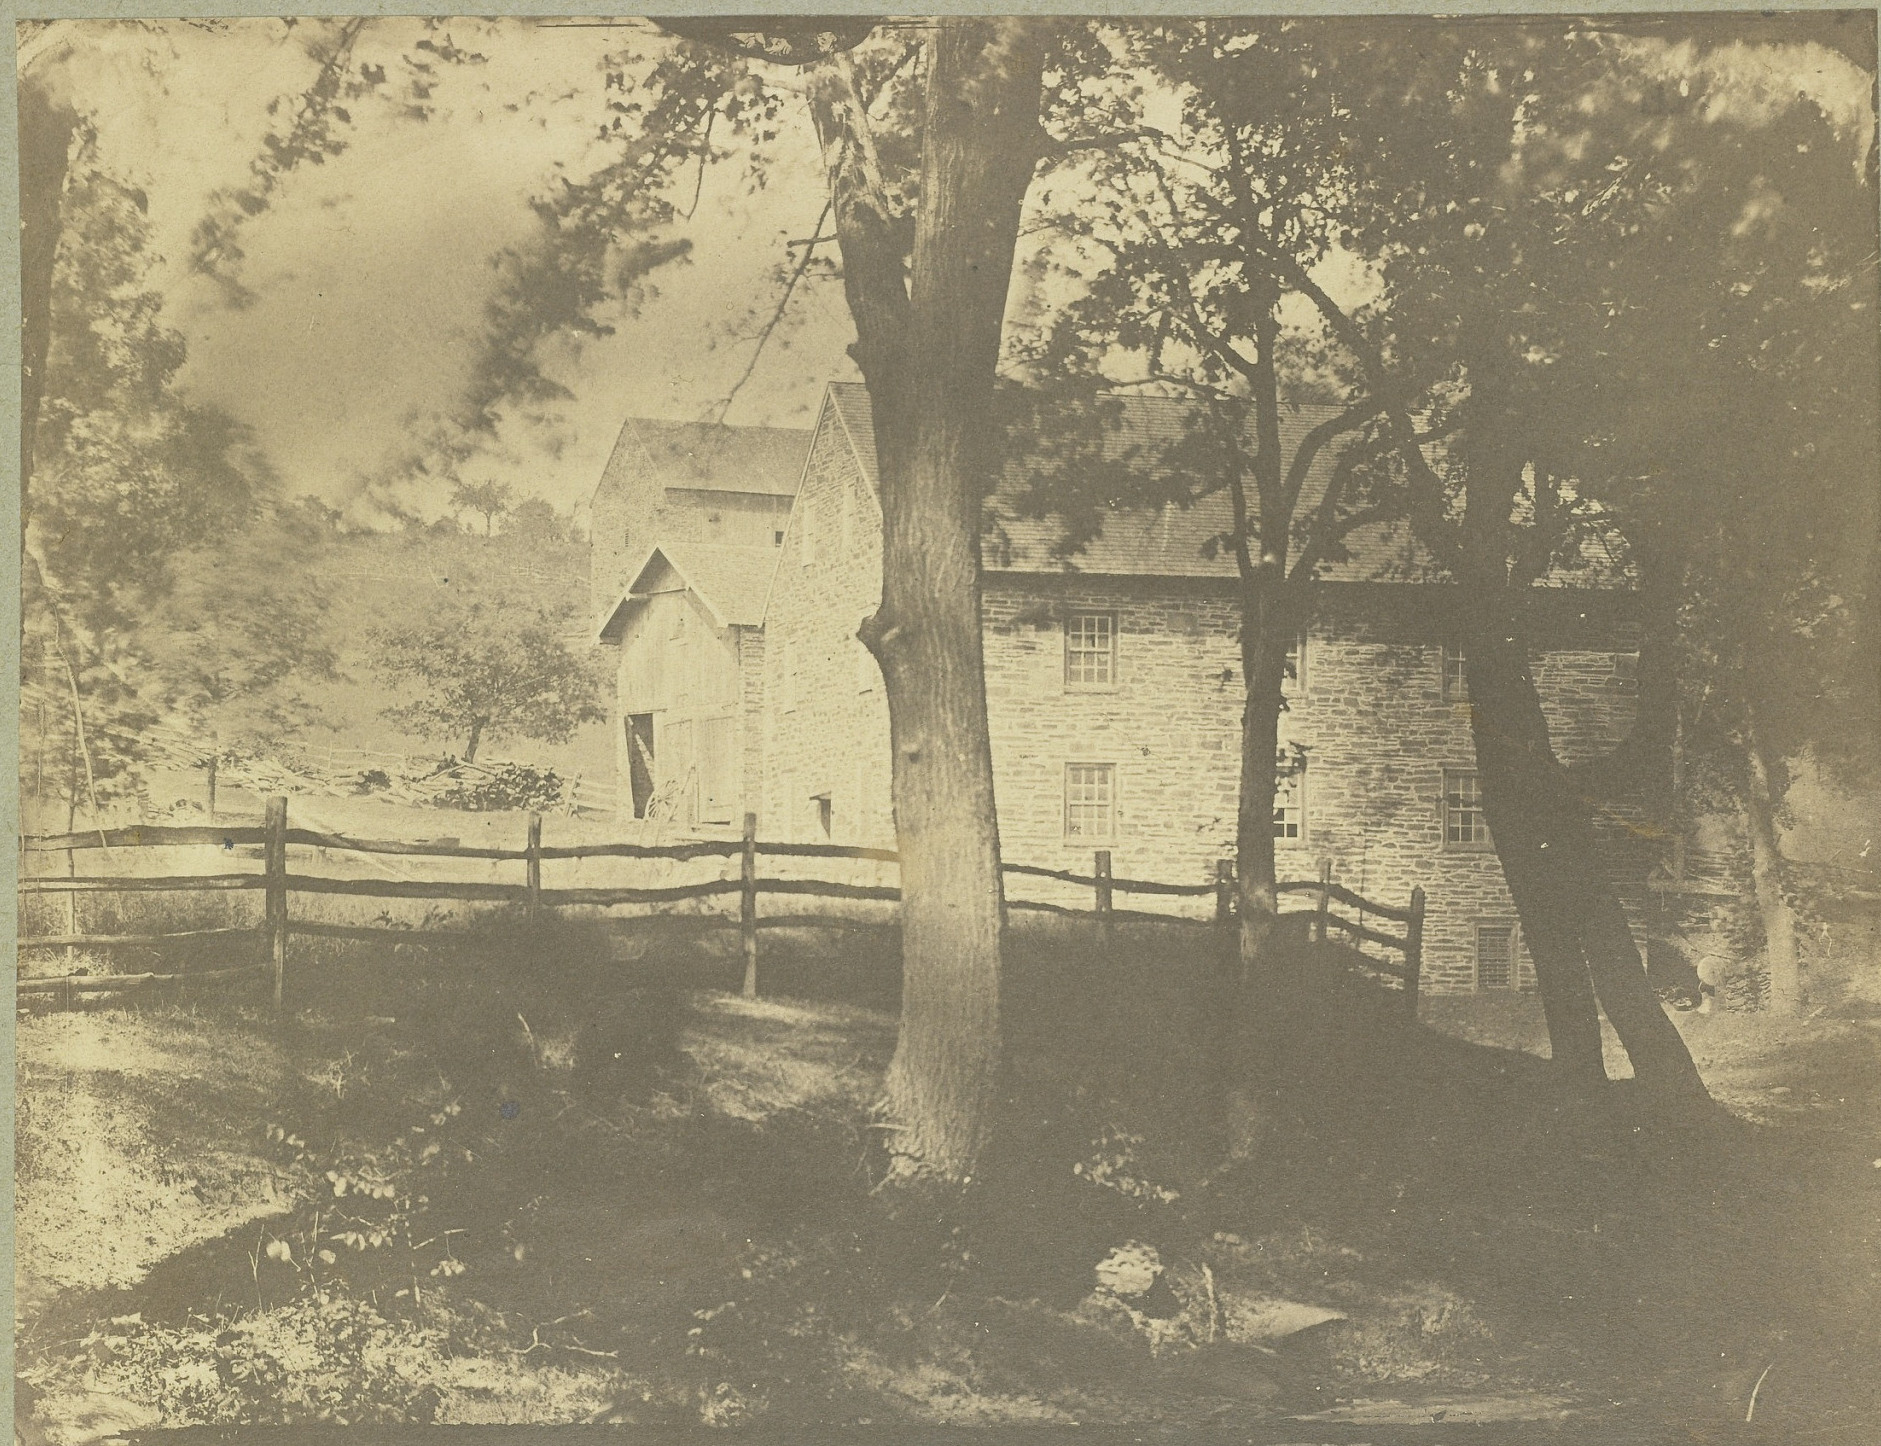 Very old black and white photograph of Peirce Mill with the barn in the distance. Handwritten caption